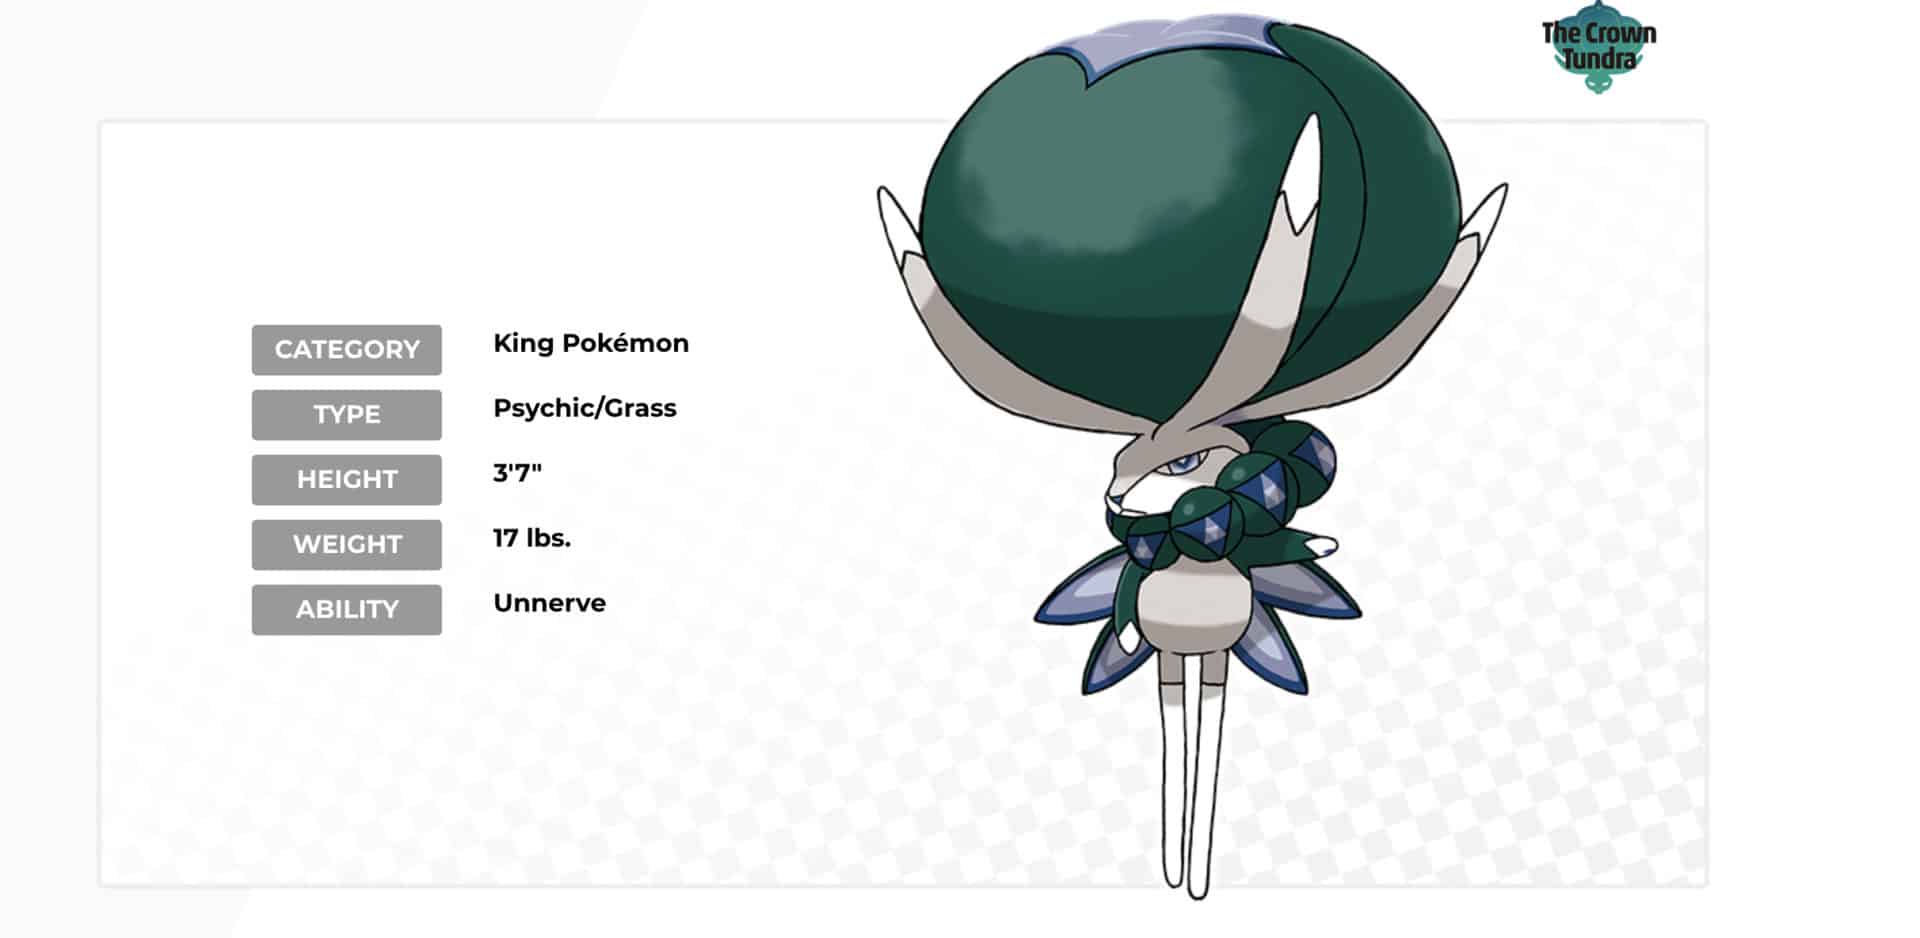 17 Galar region exclusives leaked for Pokemon Sword and Shield - Dexerto